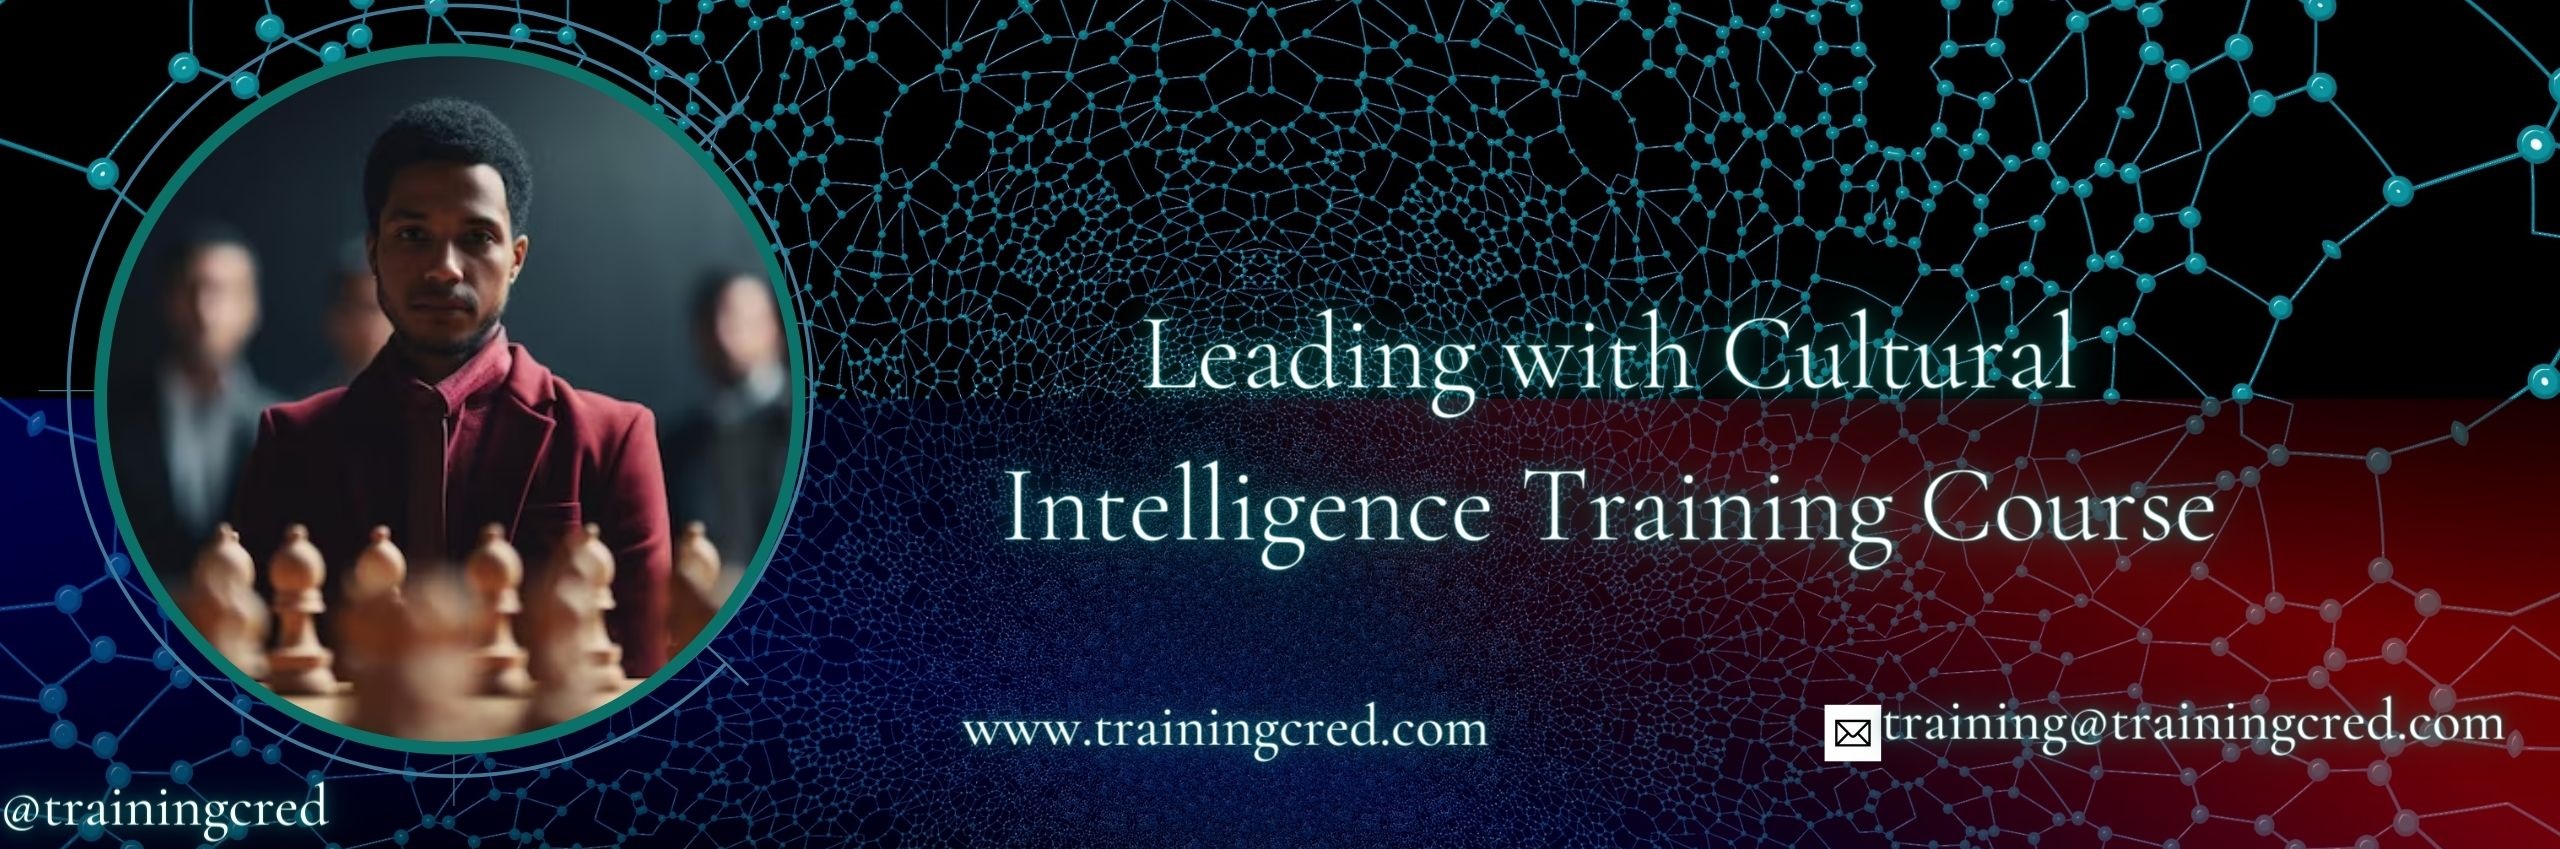 Leading with Cultural Intelligence Training